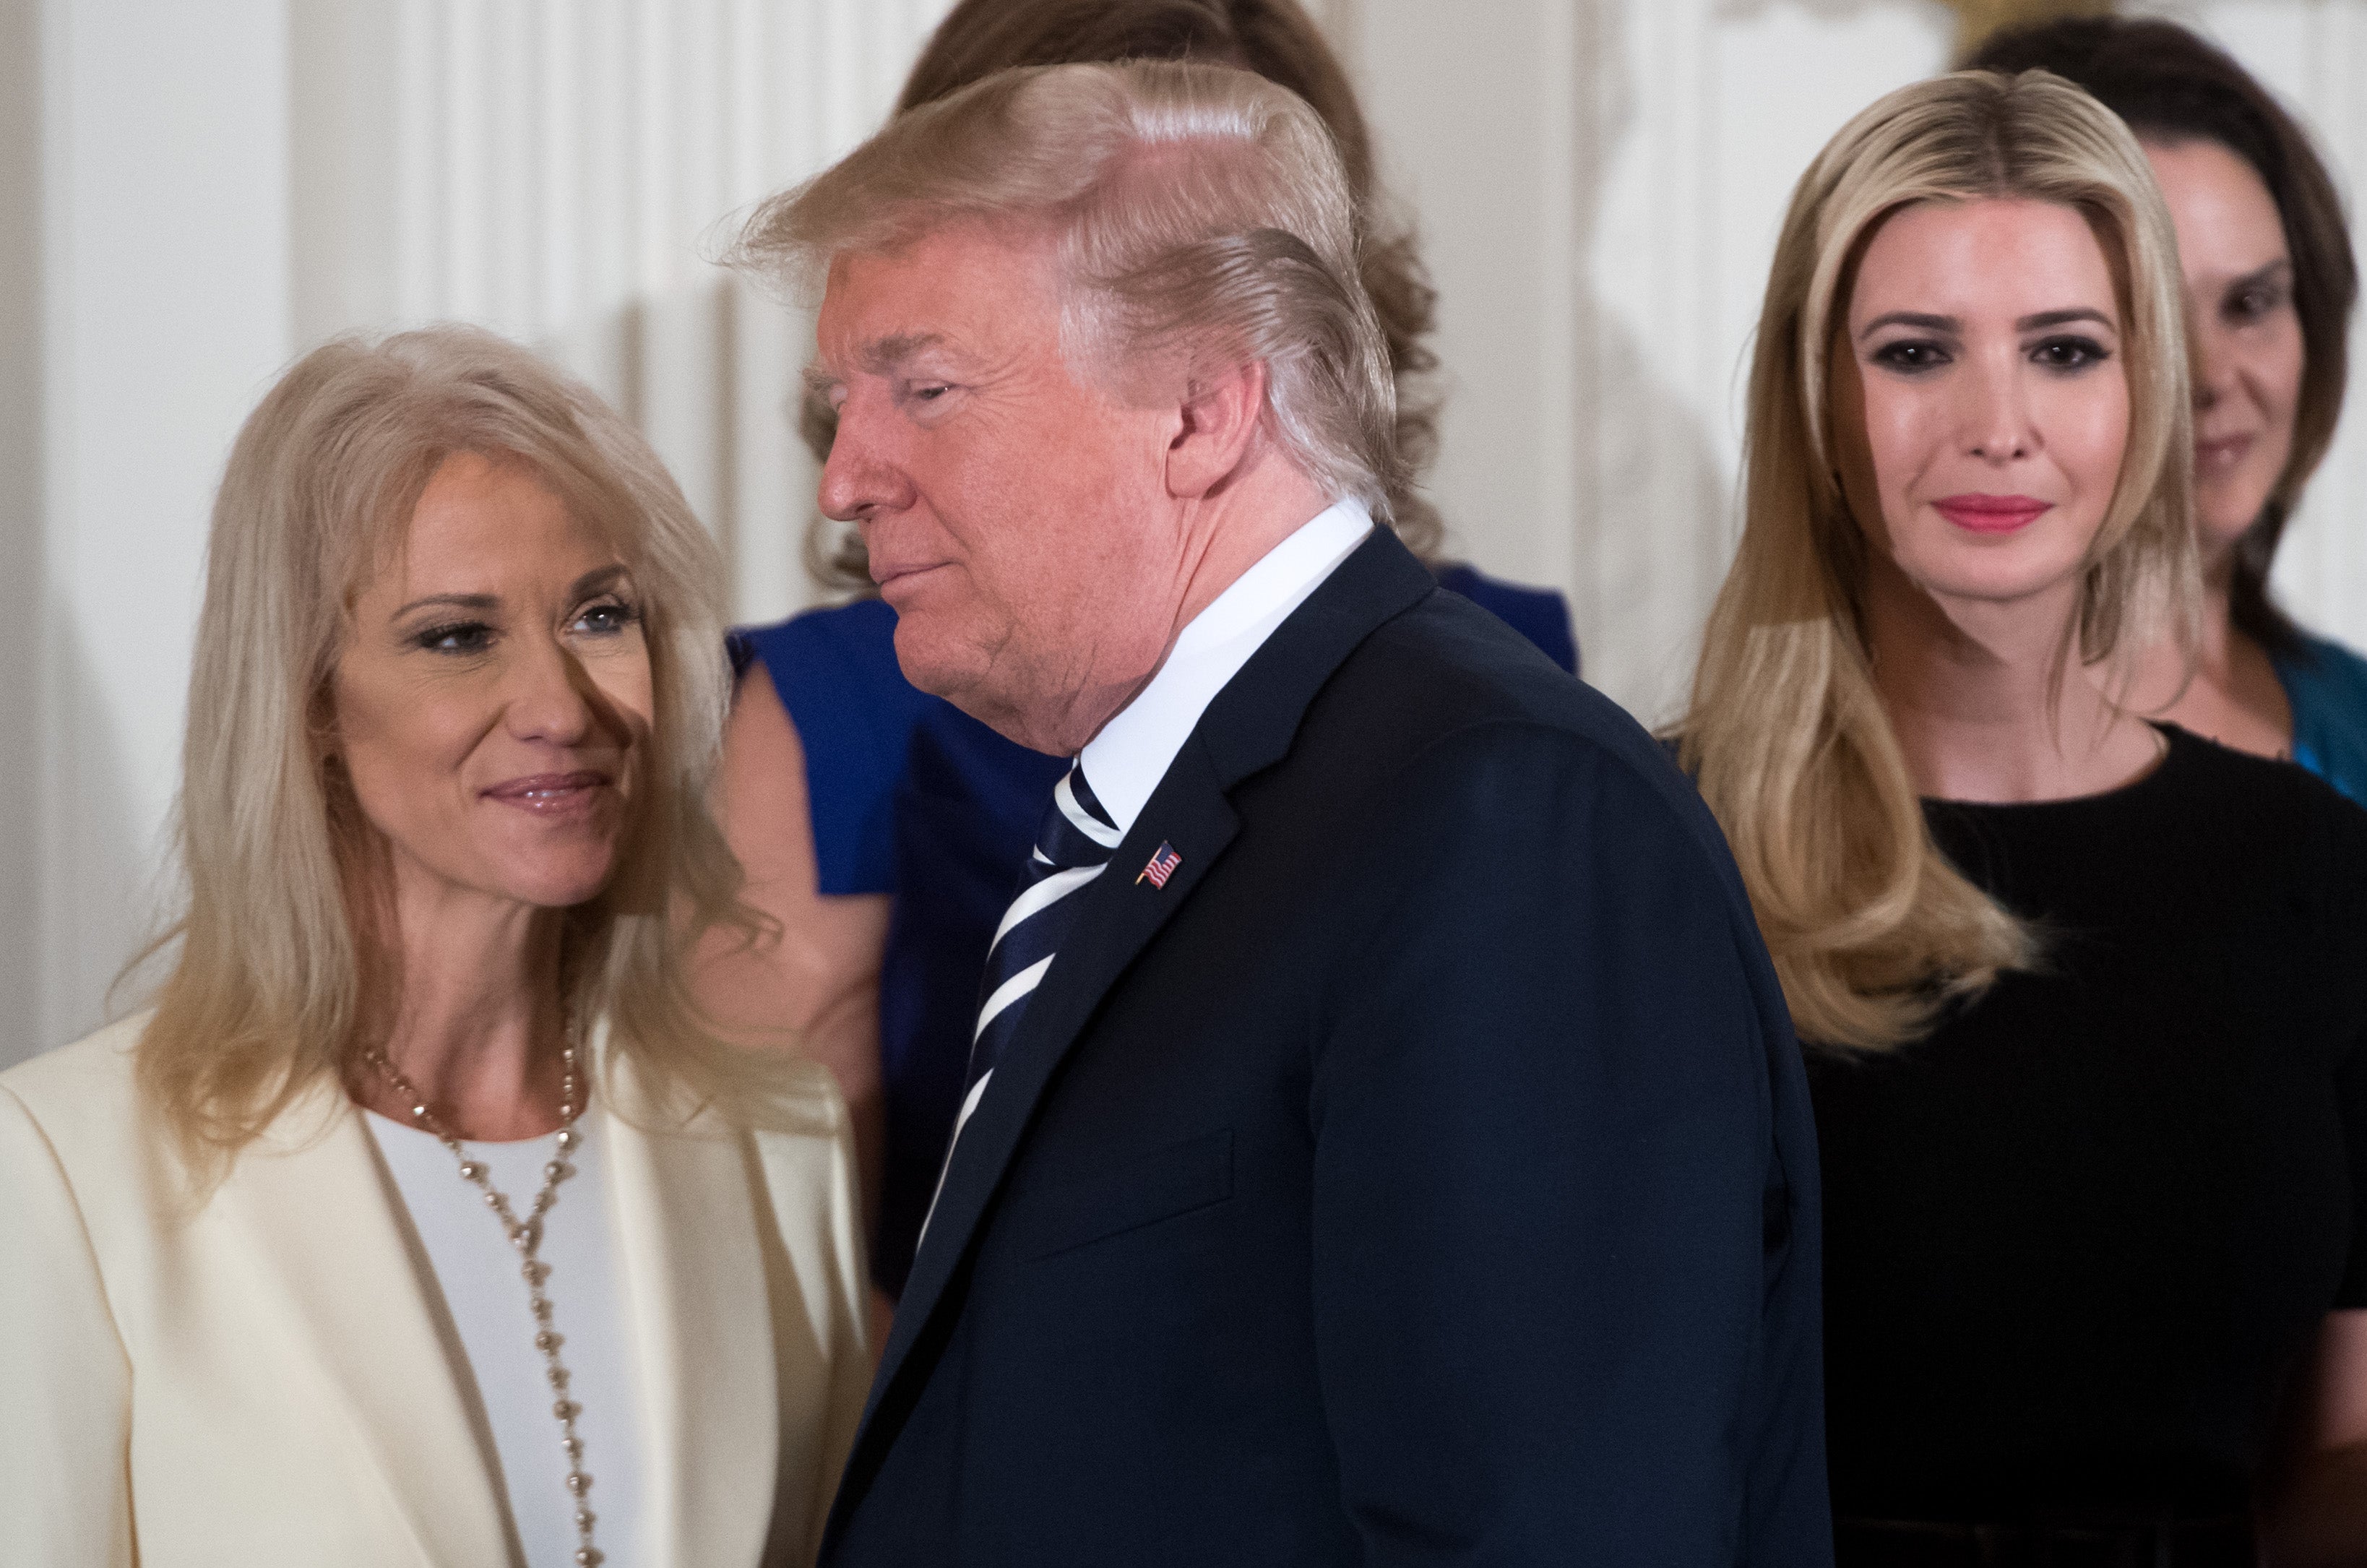 Trump, as US president, walks past his daughter Ivanka Trump (R) and Kellyanne Conway in the White House in 2018